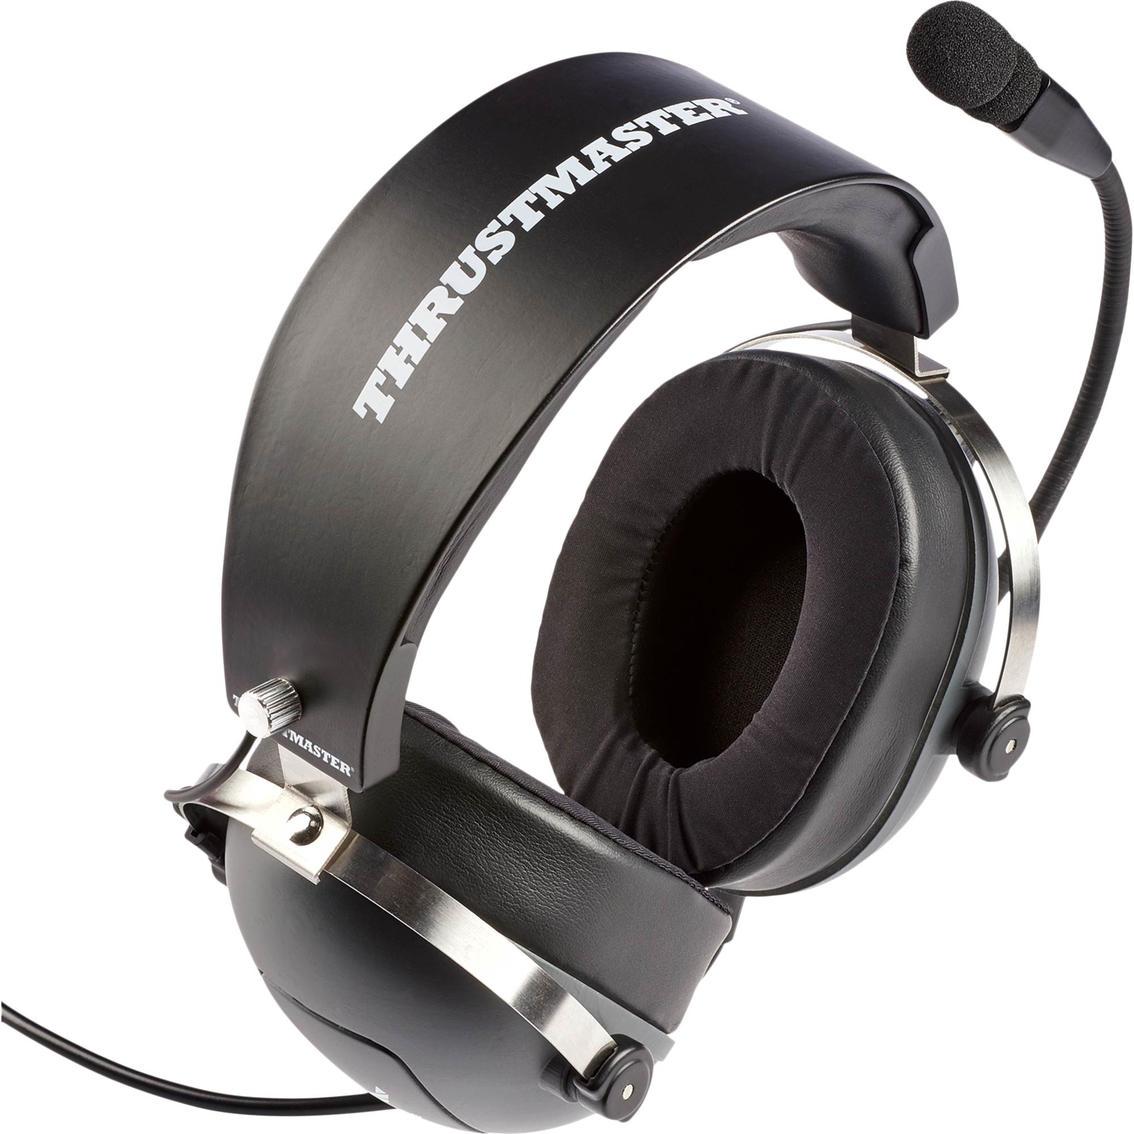 Thrustmaster T.Flight Gaming Headset (US Air Force Edition) - Image 3 of 10